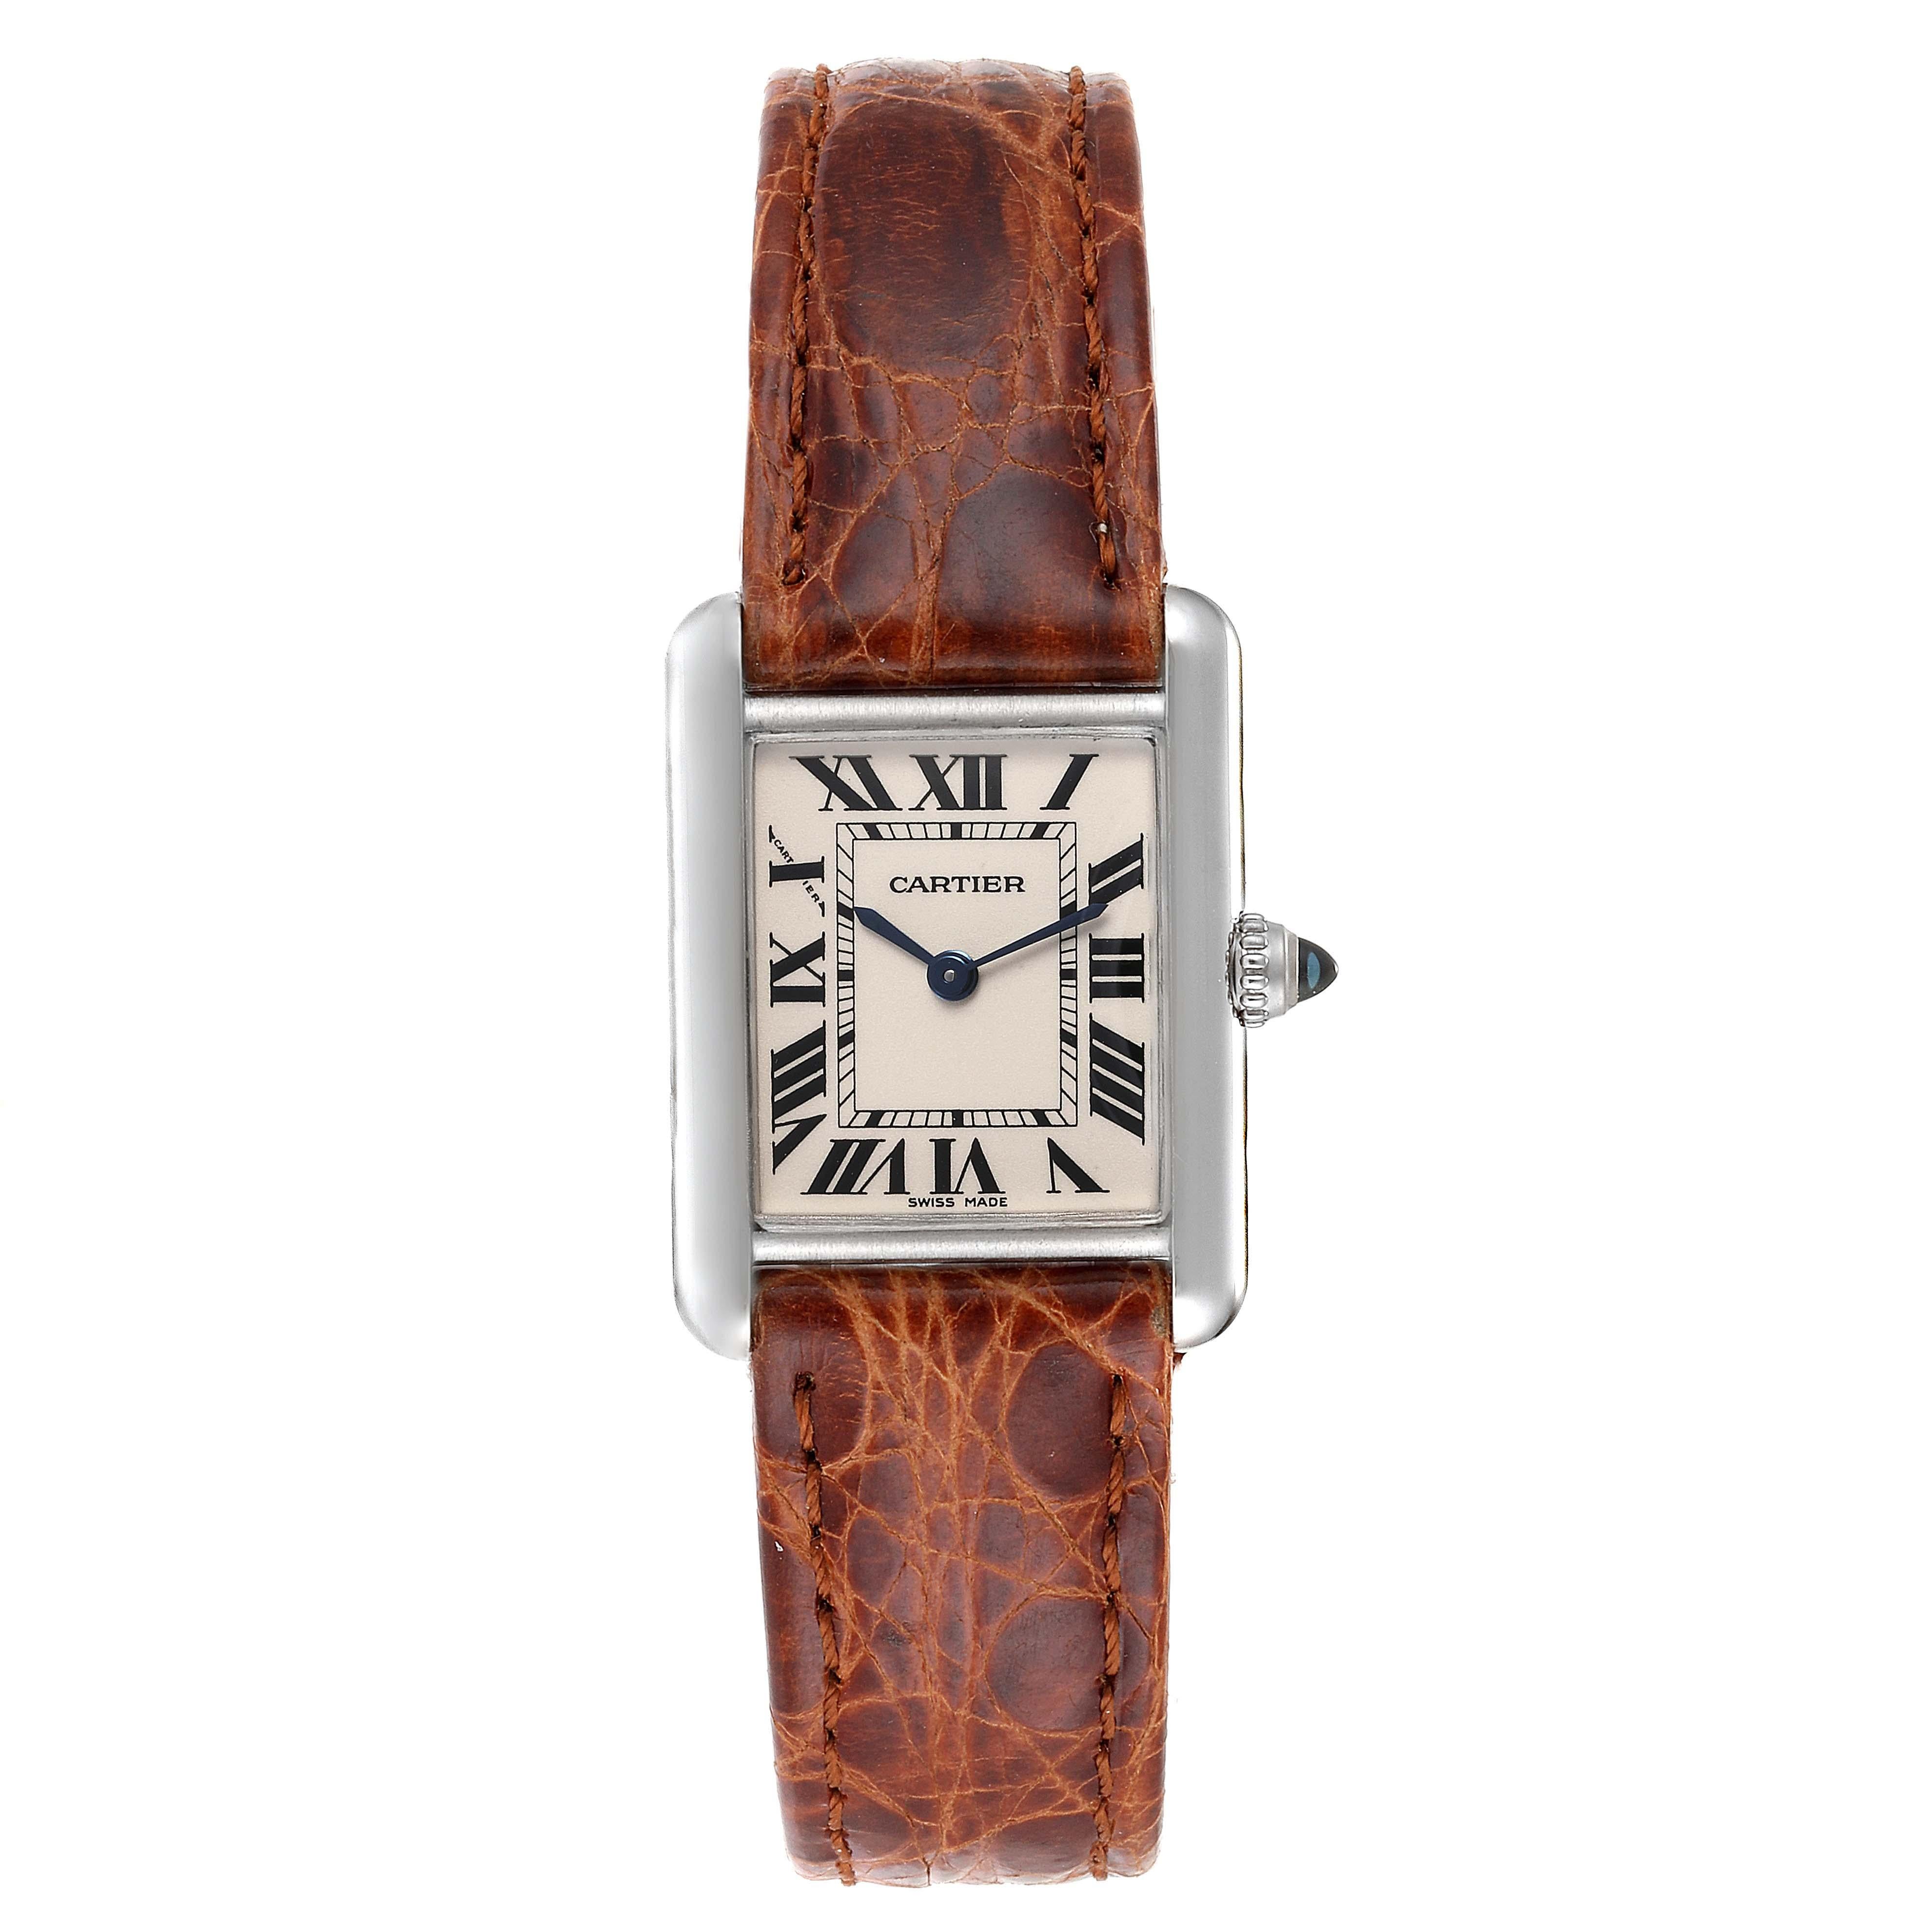 Cartier Tank Louis 18k White Gold Brown Strap Ladies Watch W1541056. Quartz movement. 18K white gold case 21.7 x 29.3 mm. Circular grained crown set with the blue sapphire cabochon. . Scratch resistant sapphire crystal. Silvered grained dial with